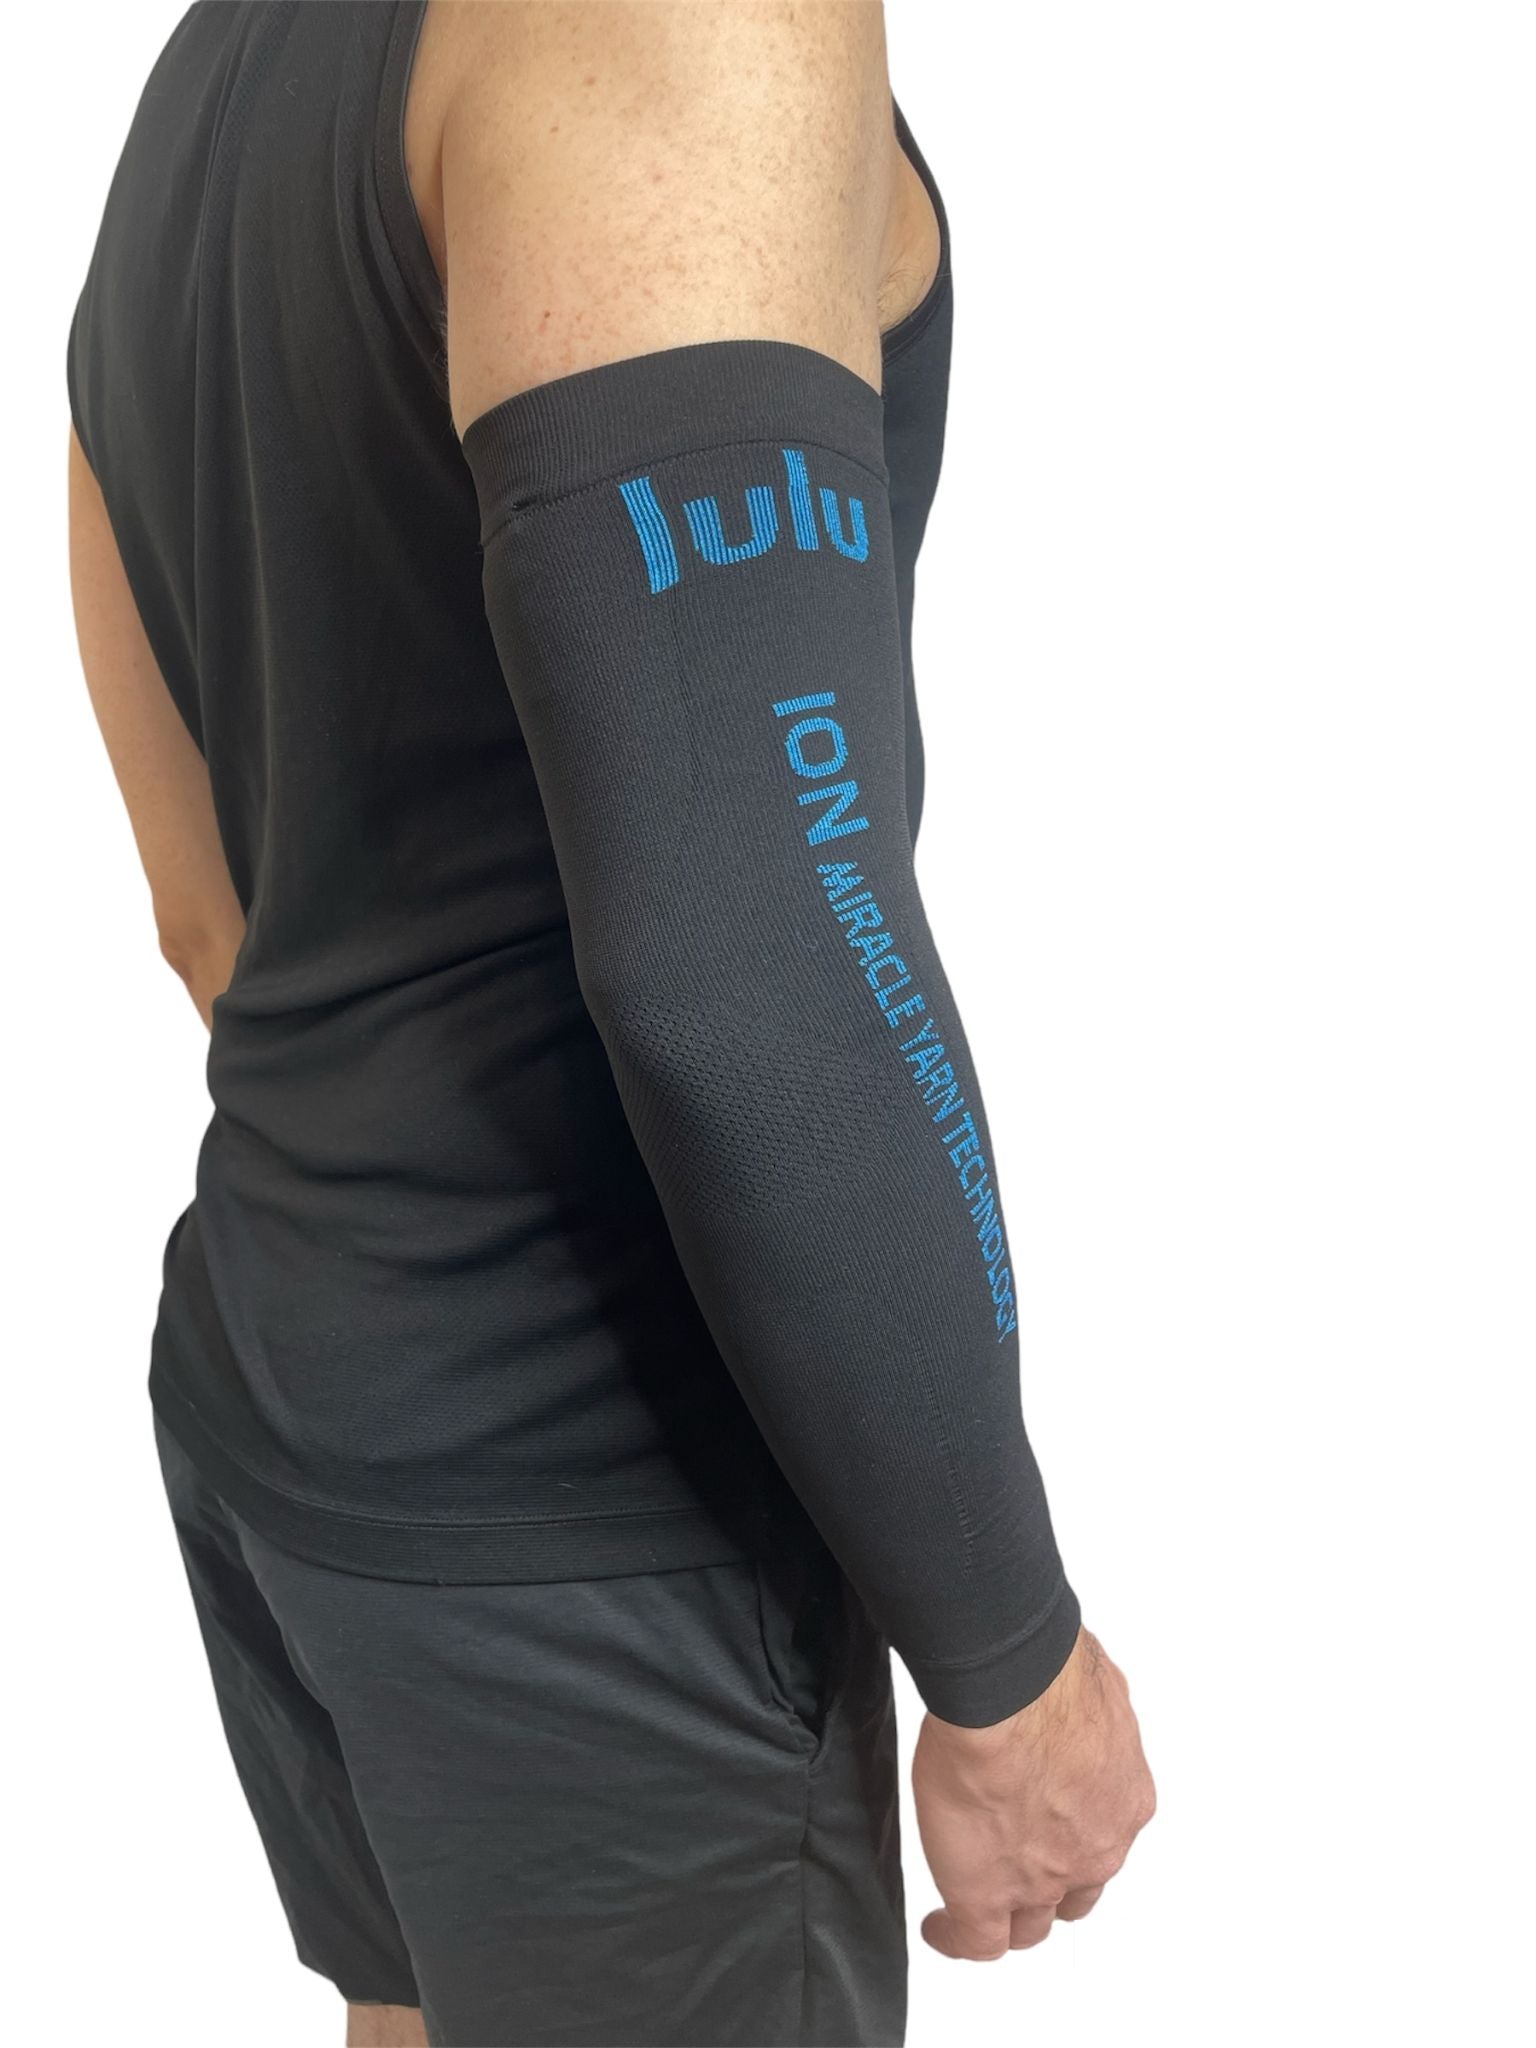 BIOFLECT® Compression Arm Sleeves Wrap with Bio India